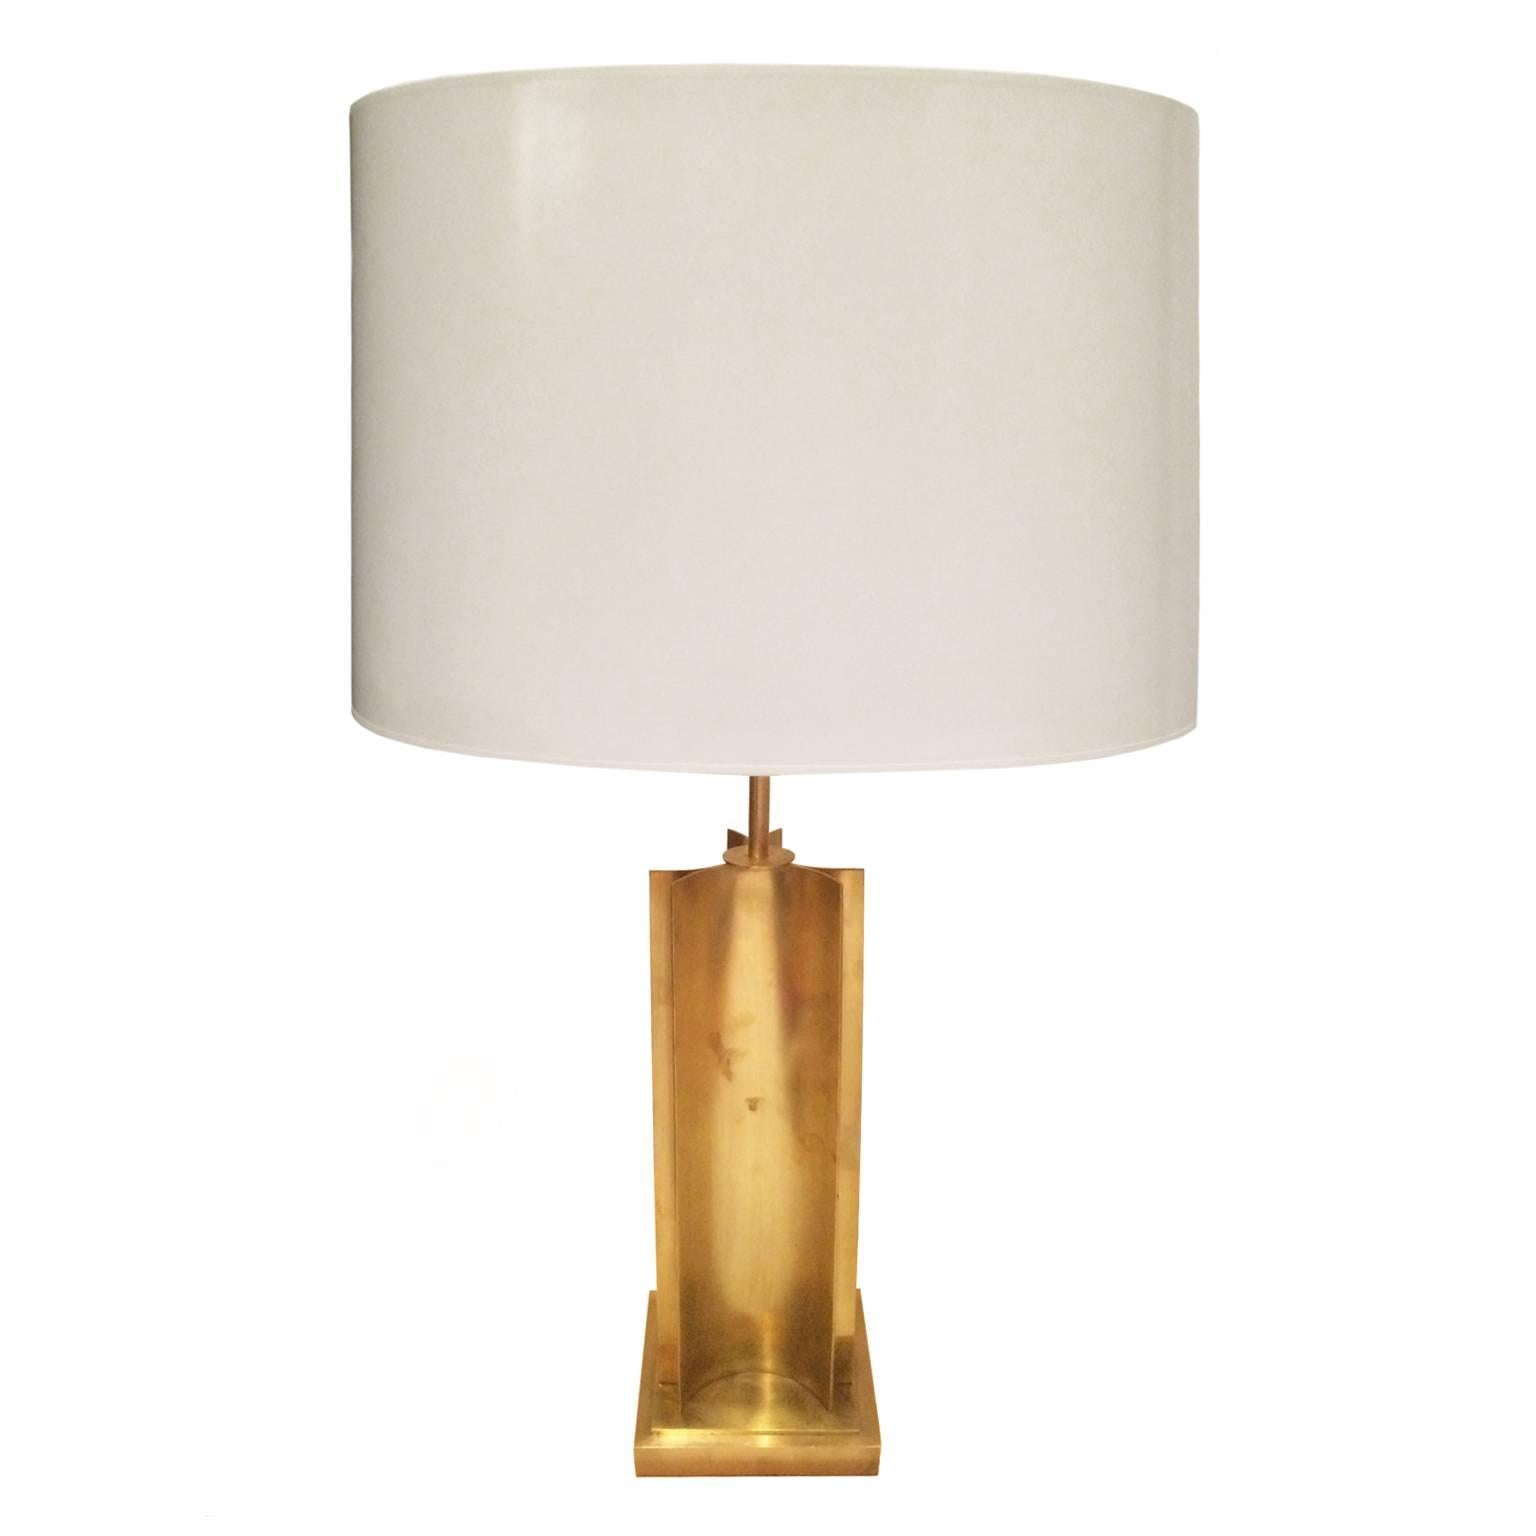 Curved Body Brass Table Lamp